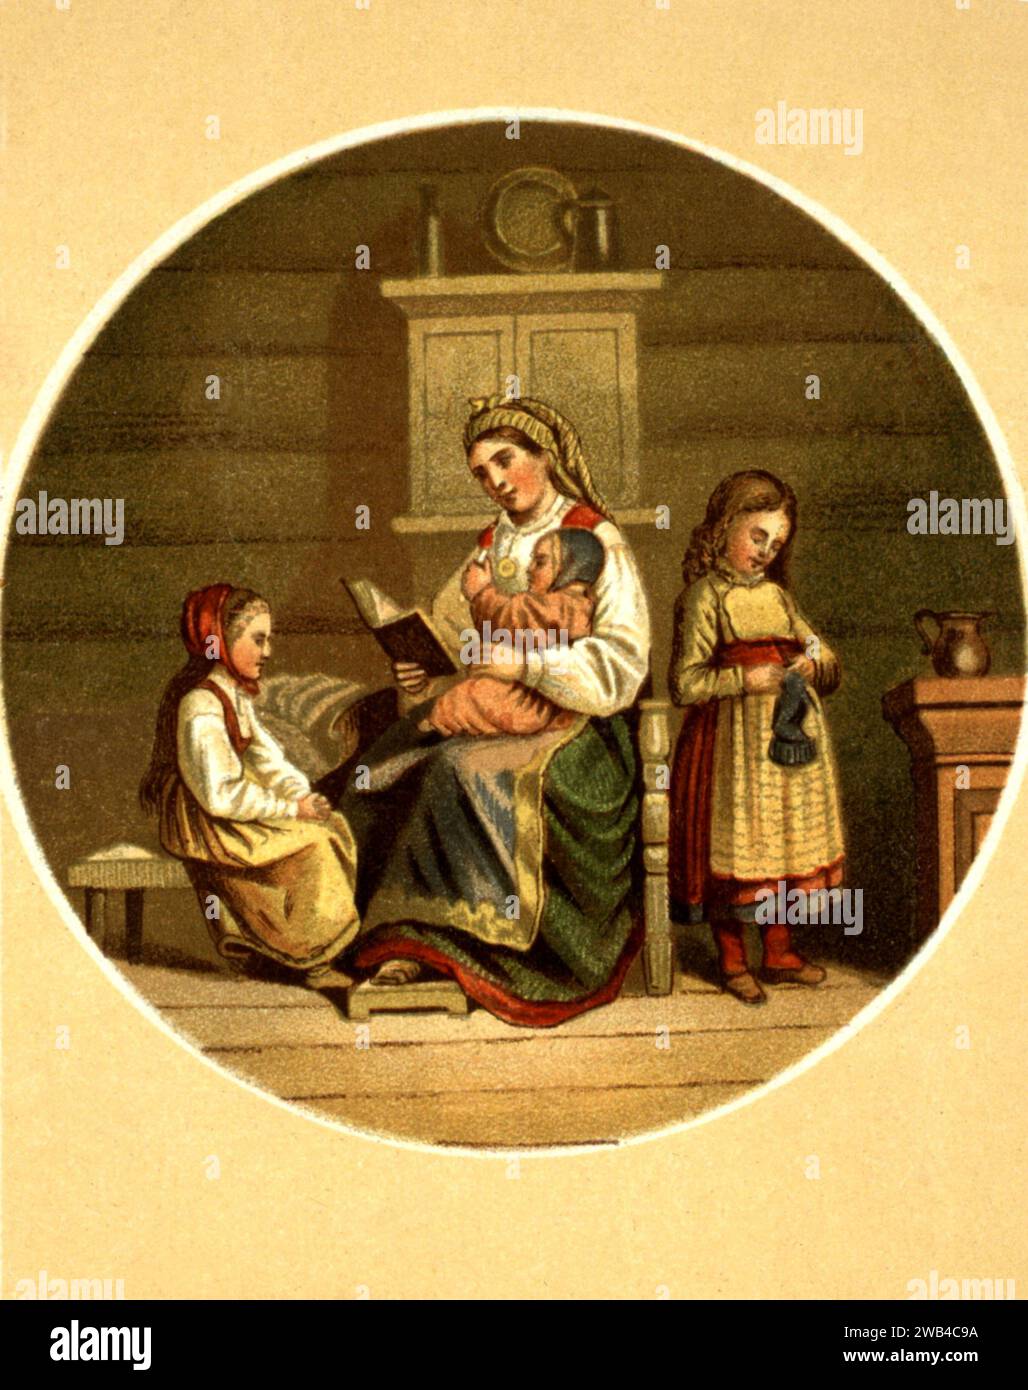 Lithograph by G. Knusli, Zurich, Woman and children 19th century Switzerland Private collection Stock Photo